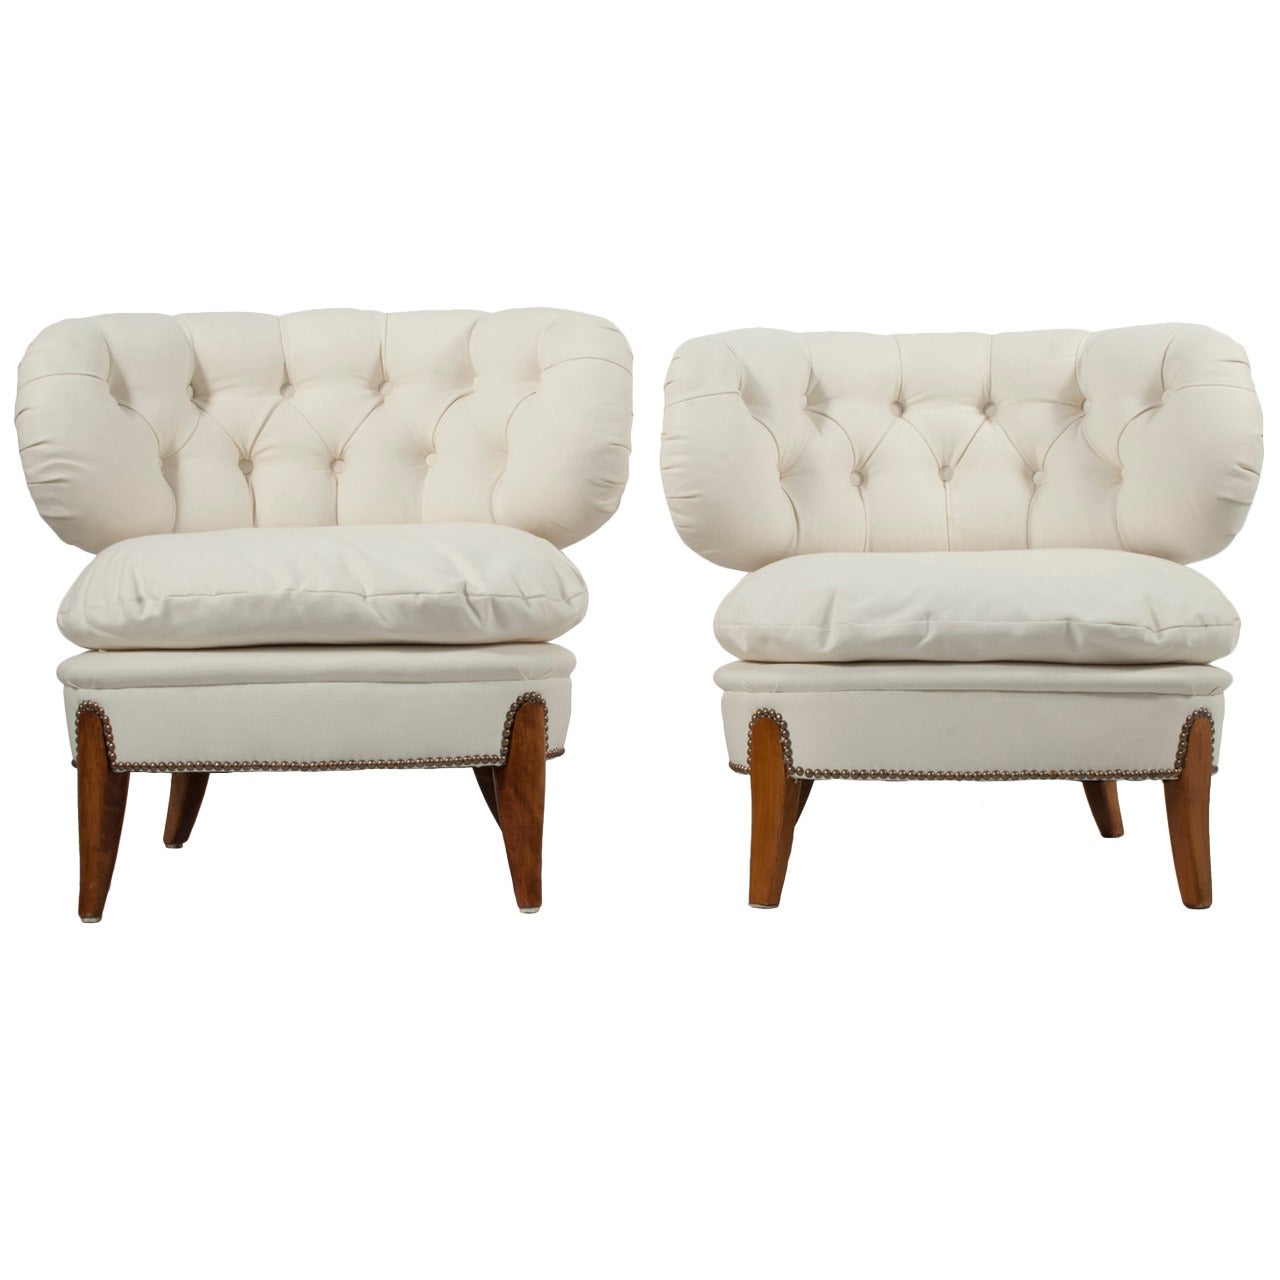 Pair of Otto Schultz Lounge Chairs For Sale